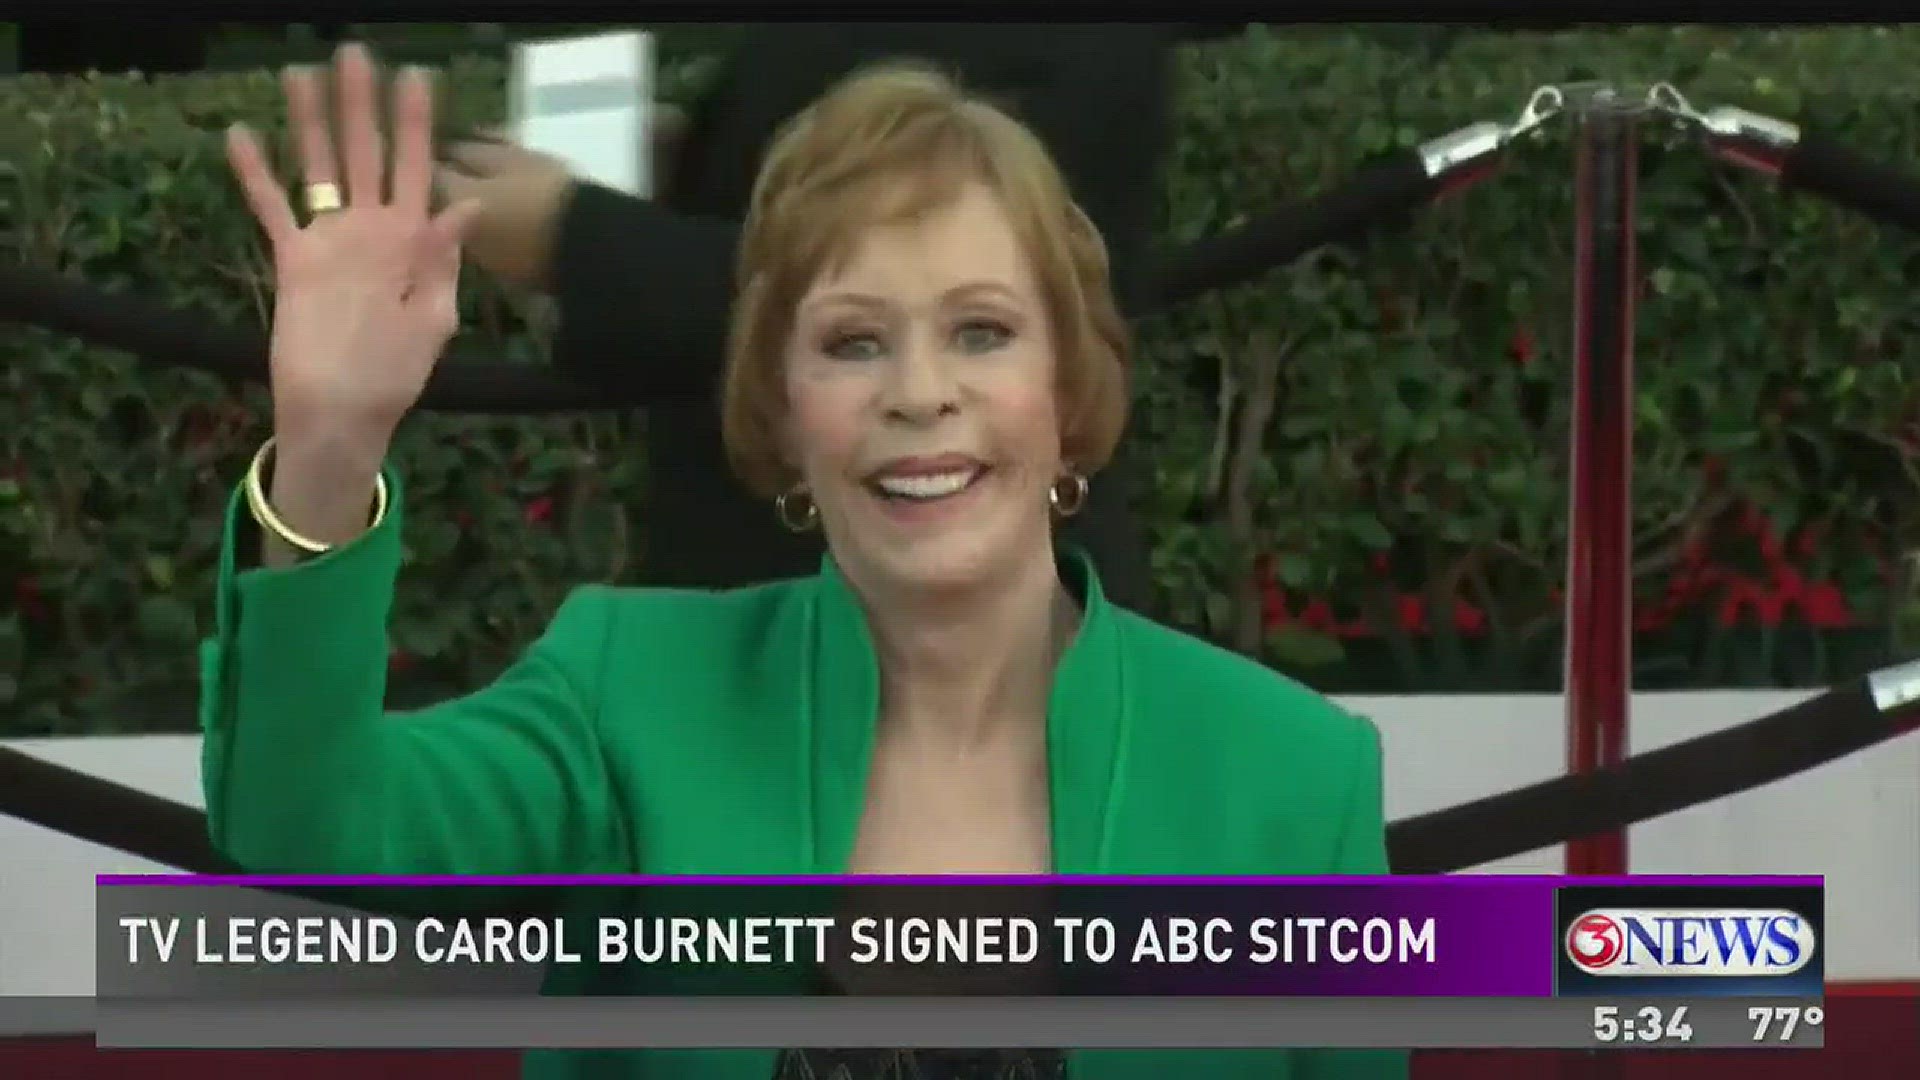 TV acting legend Carol Burnett has signed on to a new ABC sitcom with executive producer Amy Poehler.